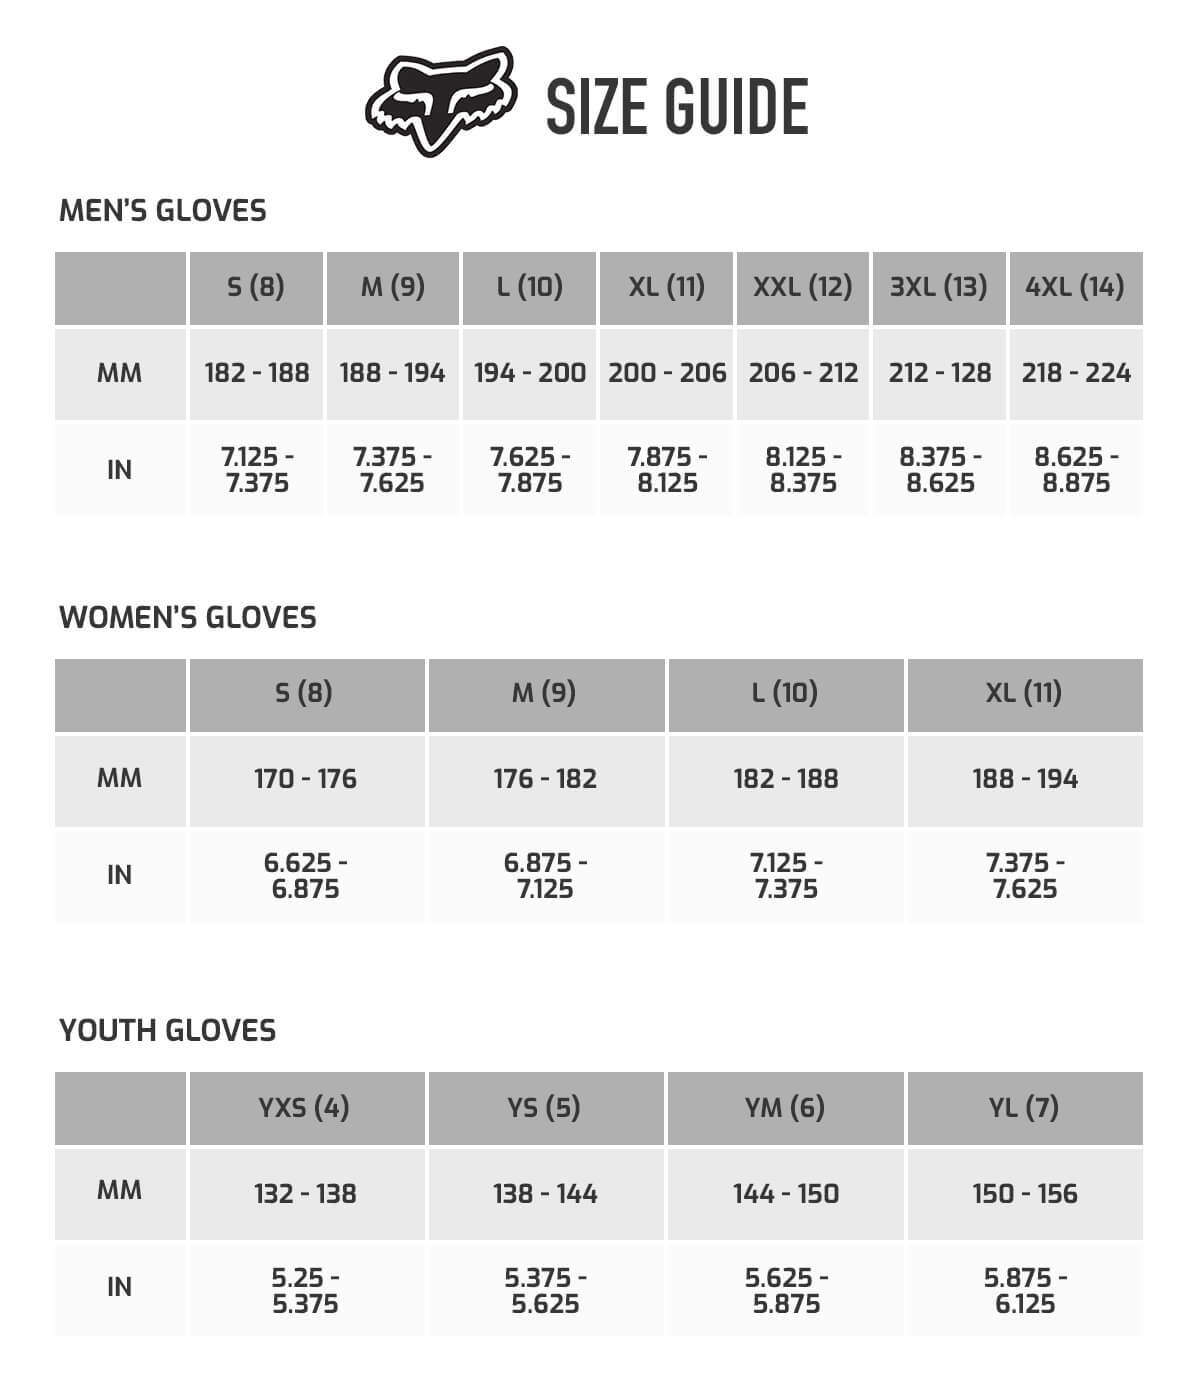 Fox Gloves Sizing Chart - Images Gloves and Descriptions Nightuplife.Com